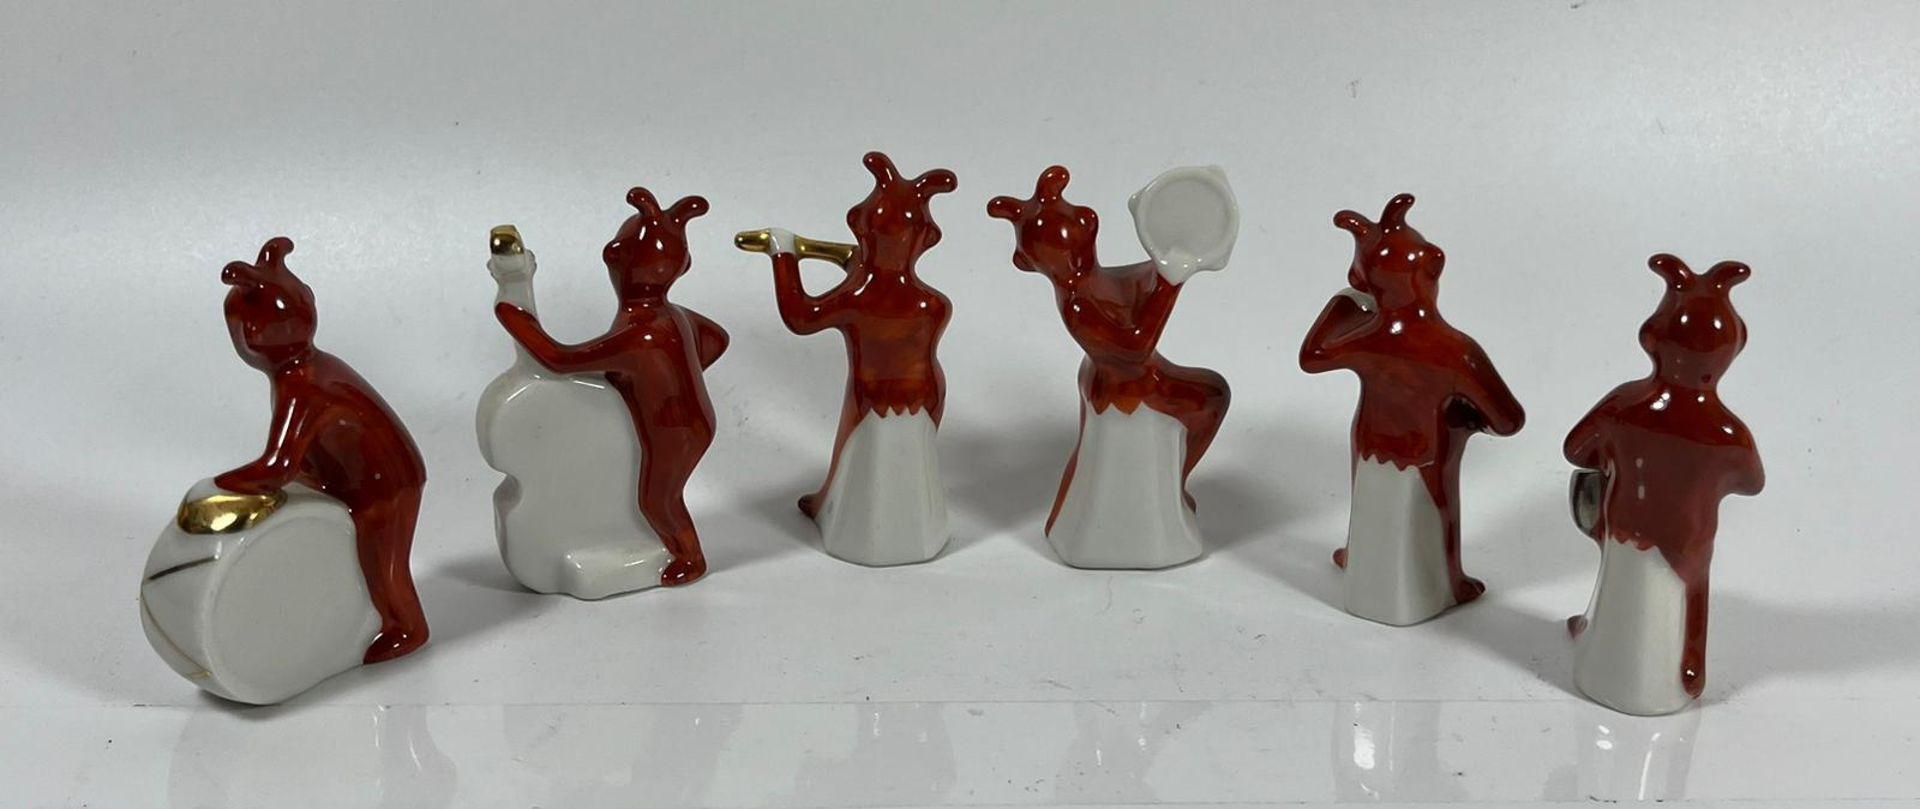 A RARE RUSSIAN MINIATURE PORCELAIN SET OF JESTER MUSICIAN FIGURES, HEIGHT 6CM - Image 2 of 5